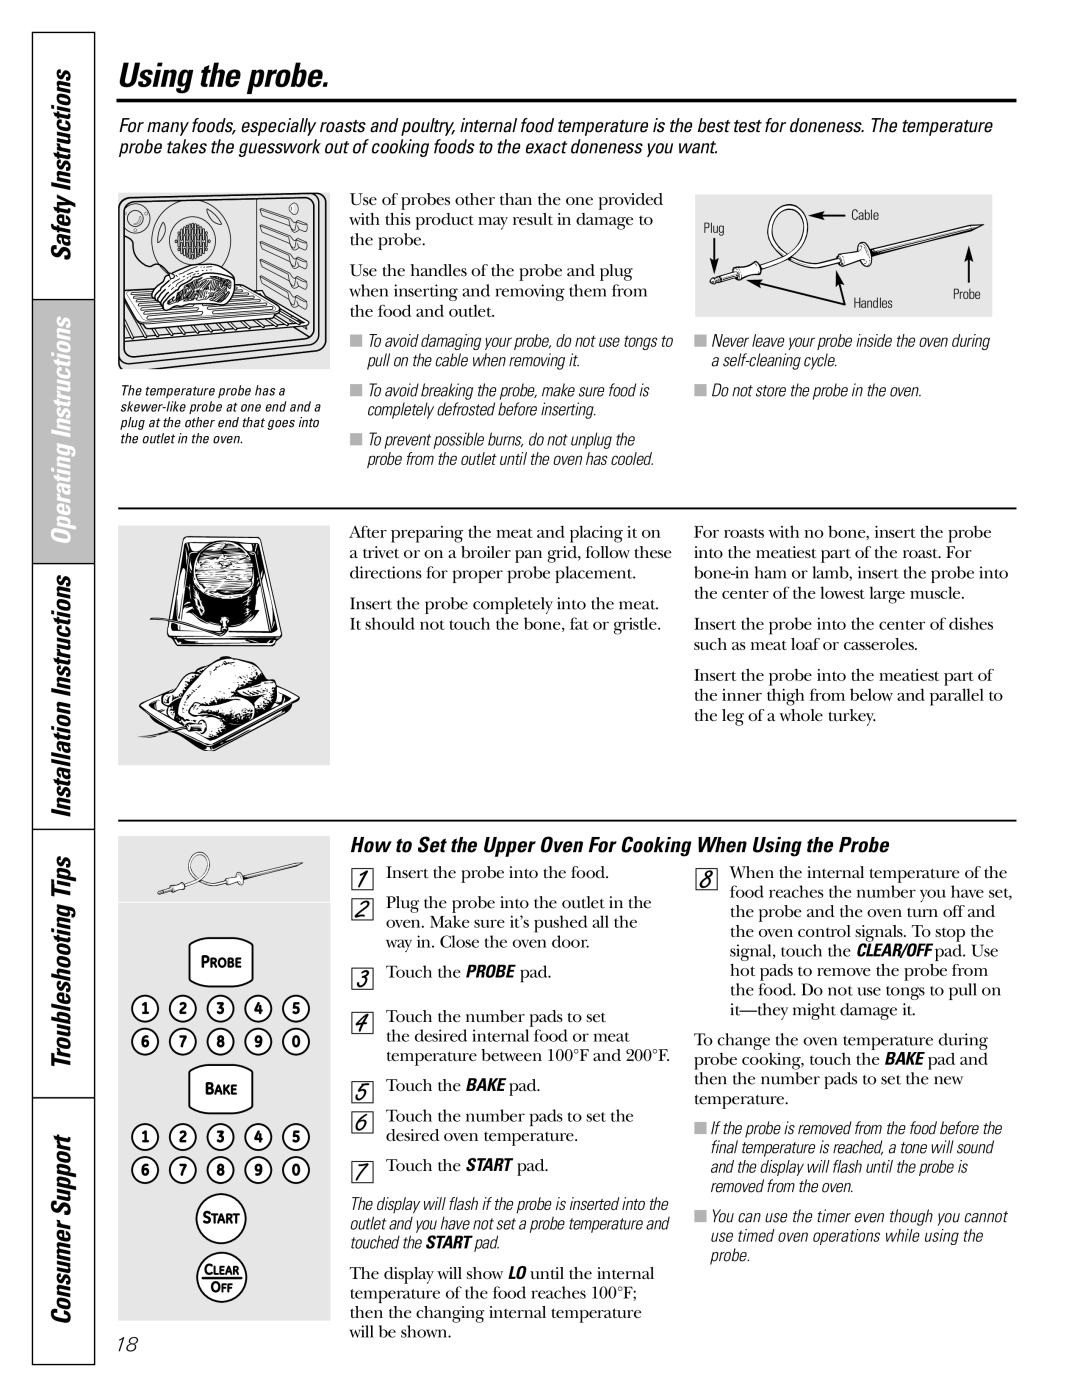 GE CGS980 Using the probe, Installation Instructions, Consumer Support Troubleshooting Tips, Safety 